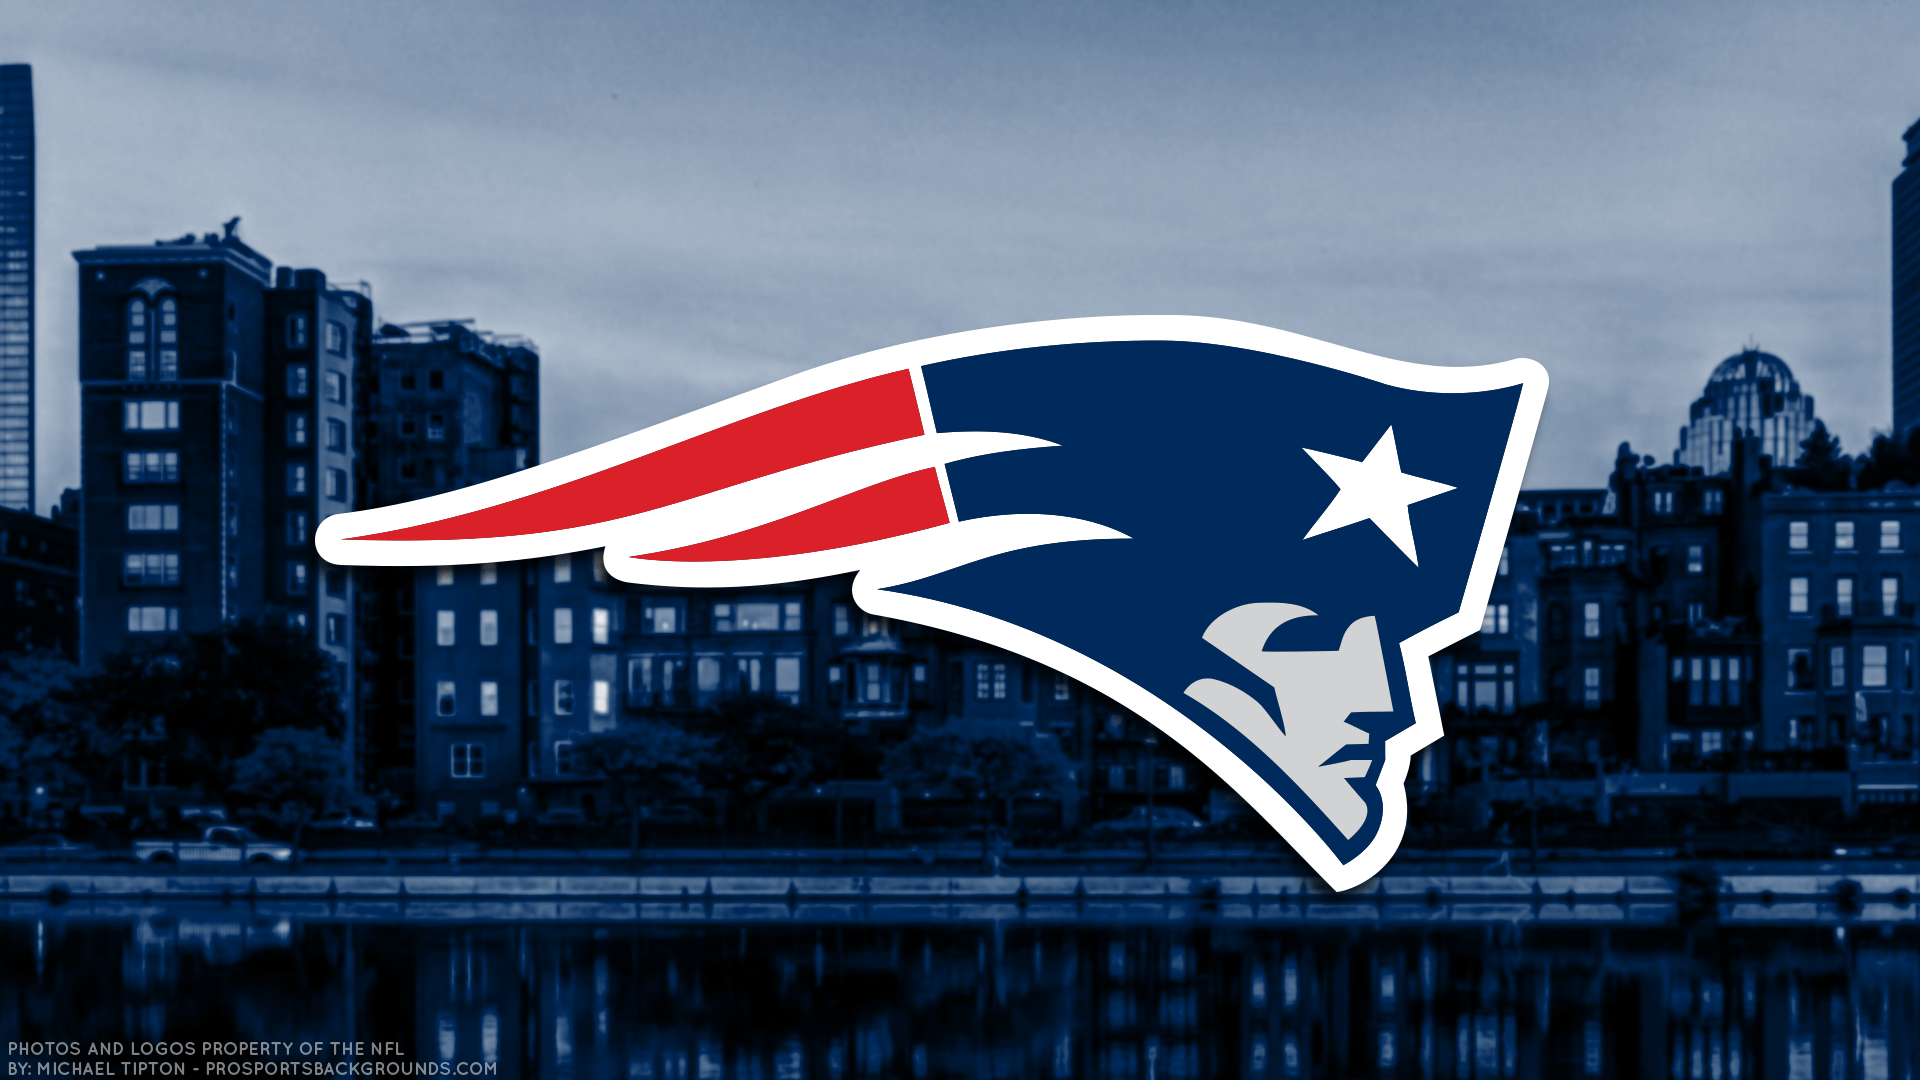 2018 Patriots Logo - 2018 New England Patriots Wallpapers - PC |iPhone| Android